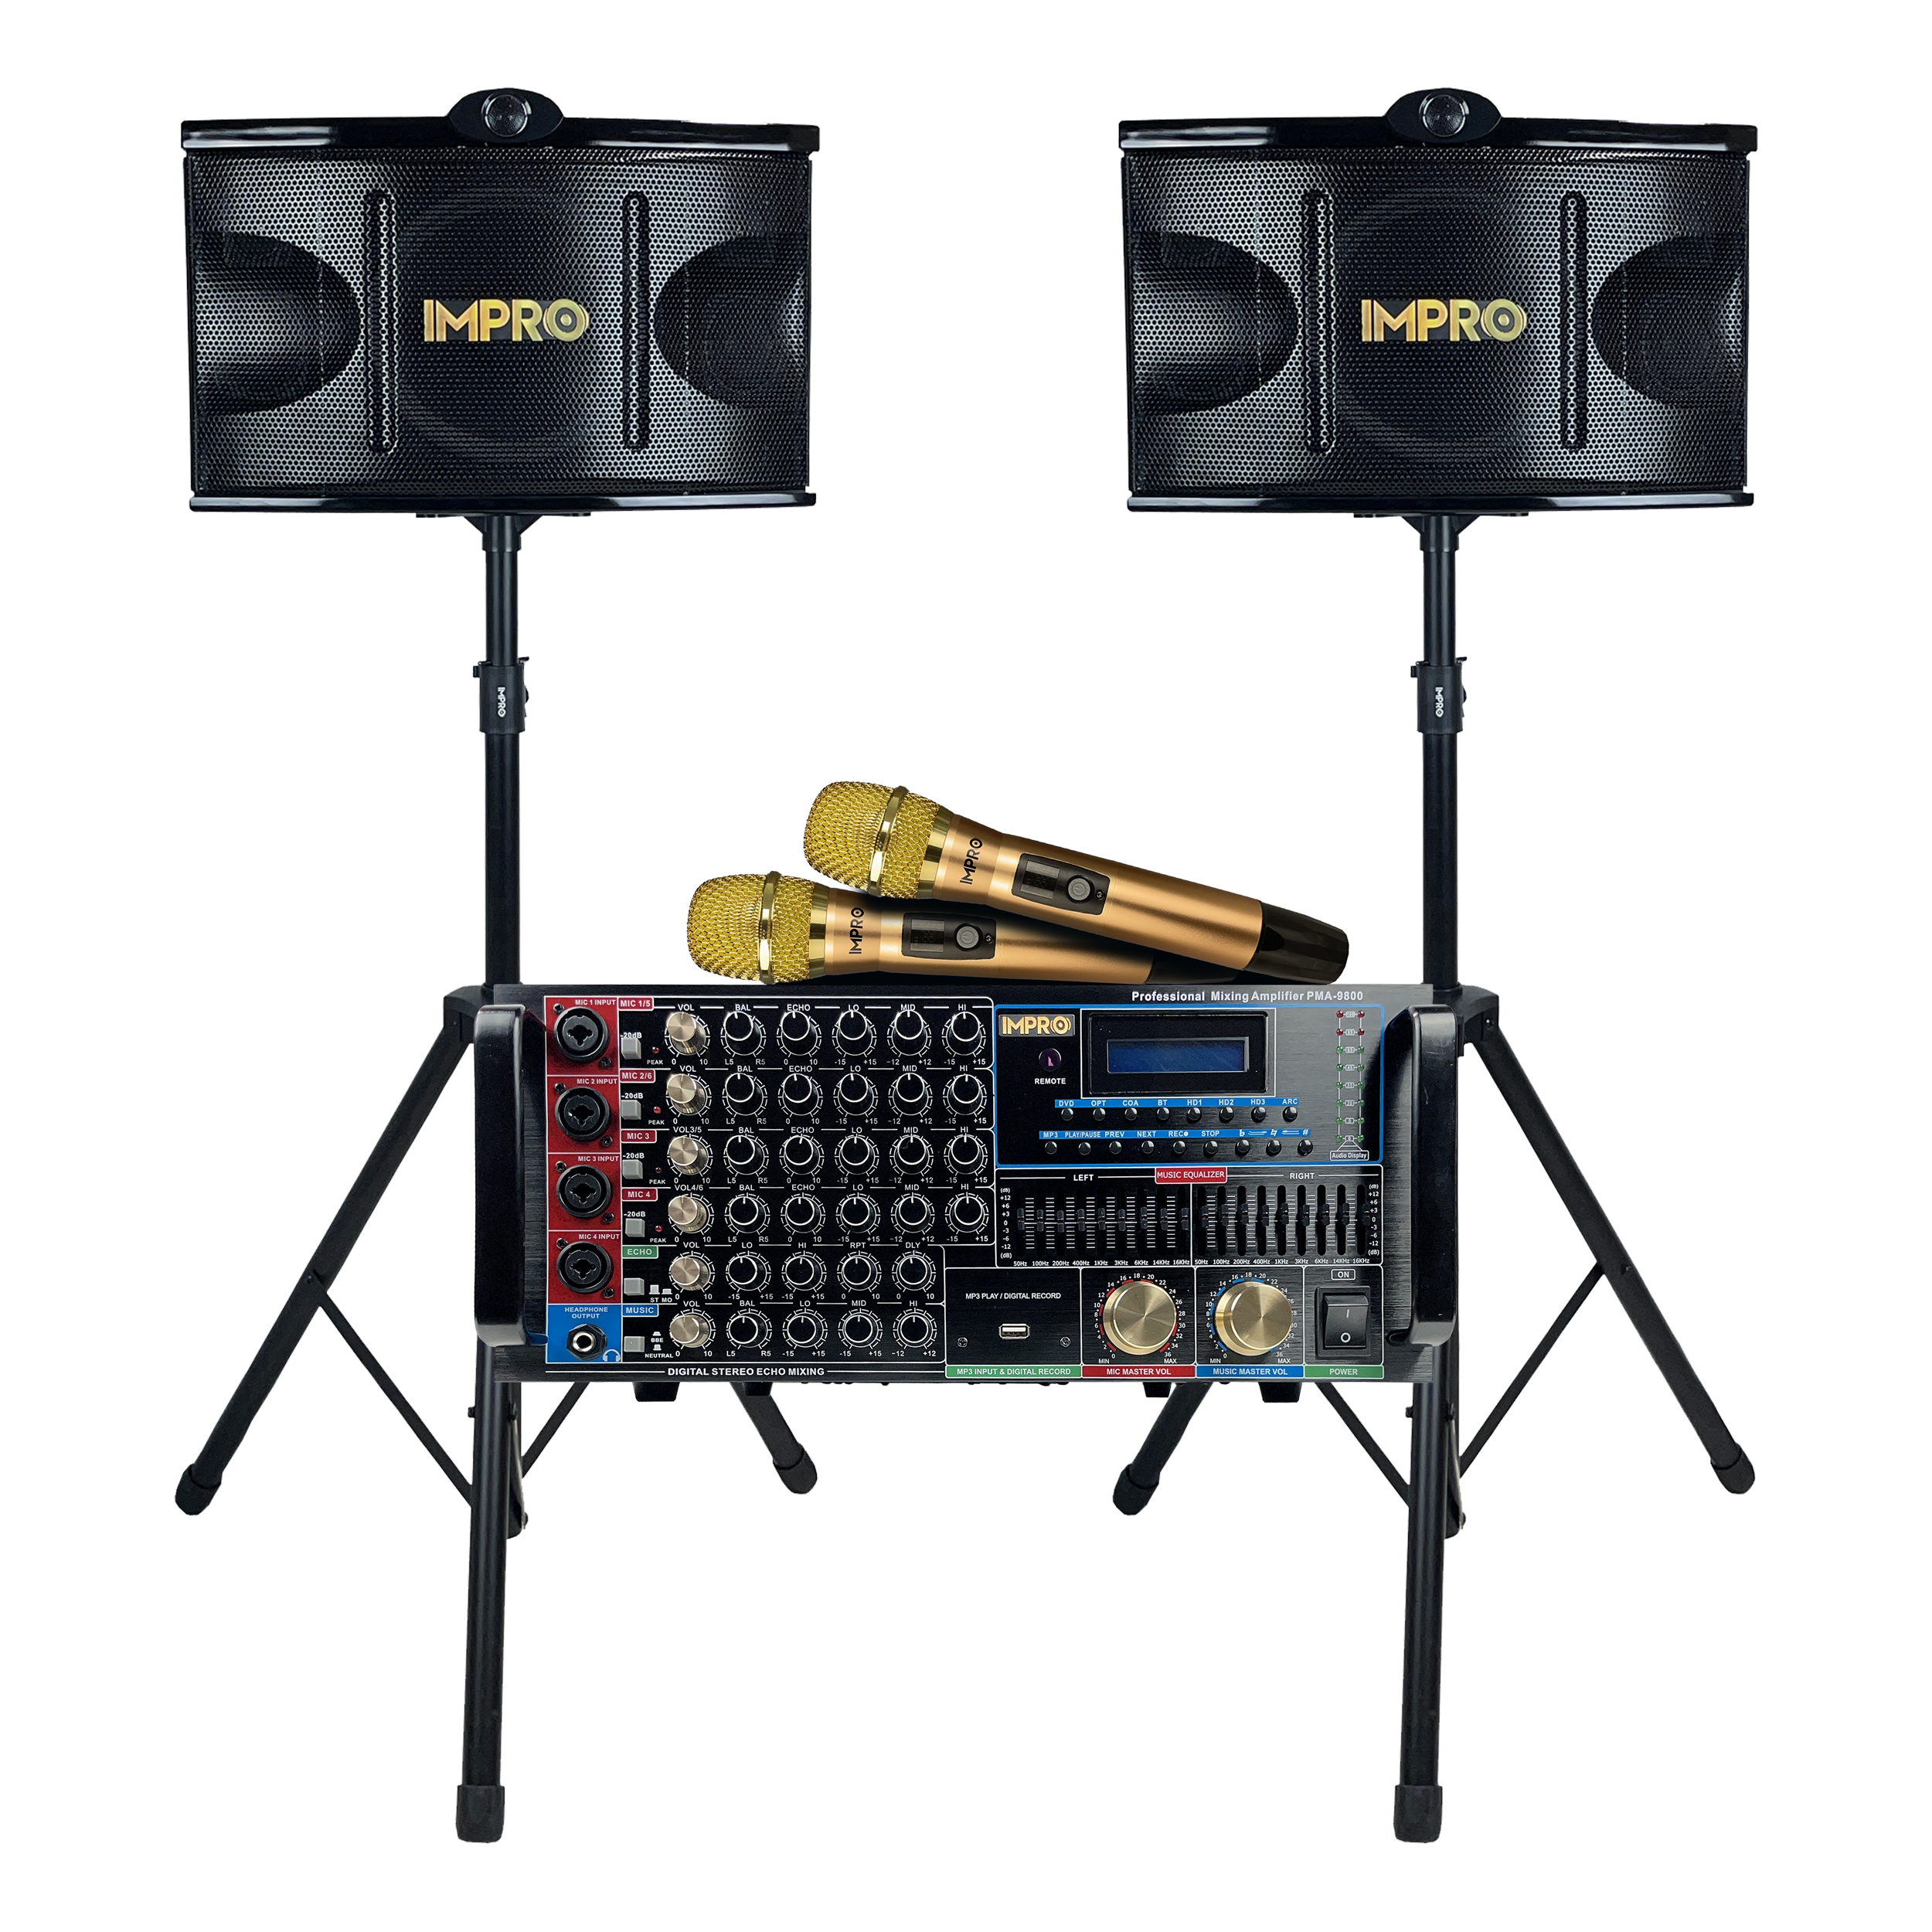 ImPro Epic Party Bundle 2 with Mixing Amplifier, Speakers, Microphones, and Accessories (5 Items)